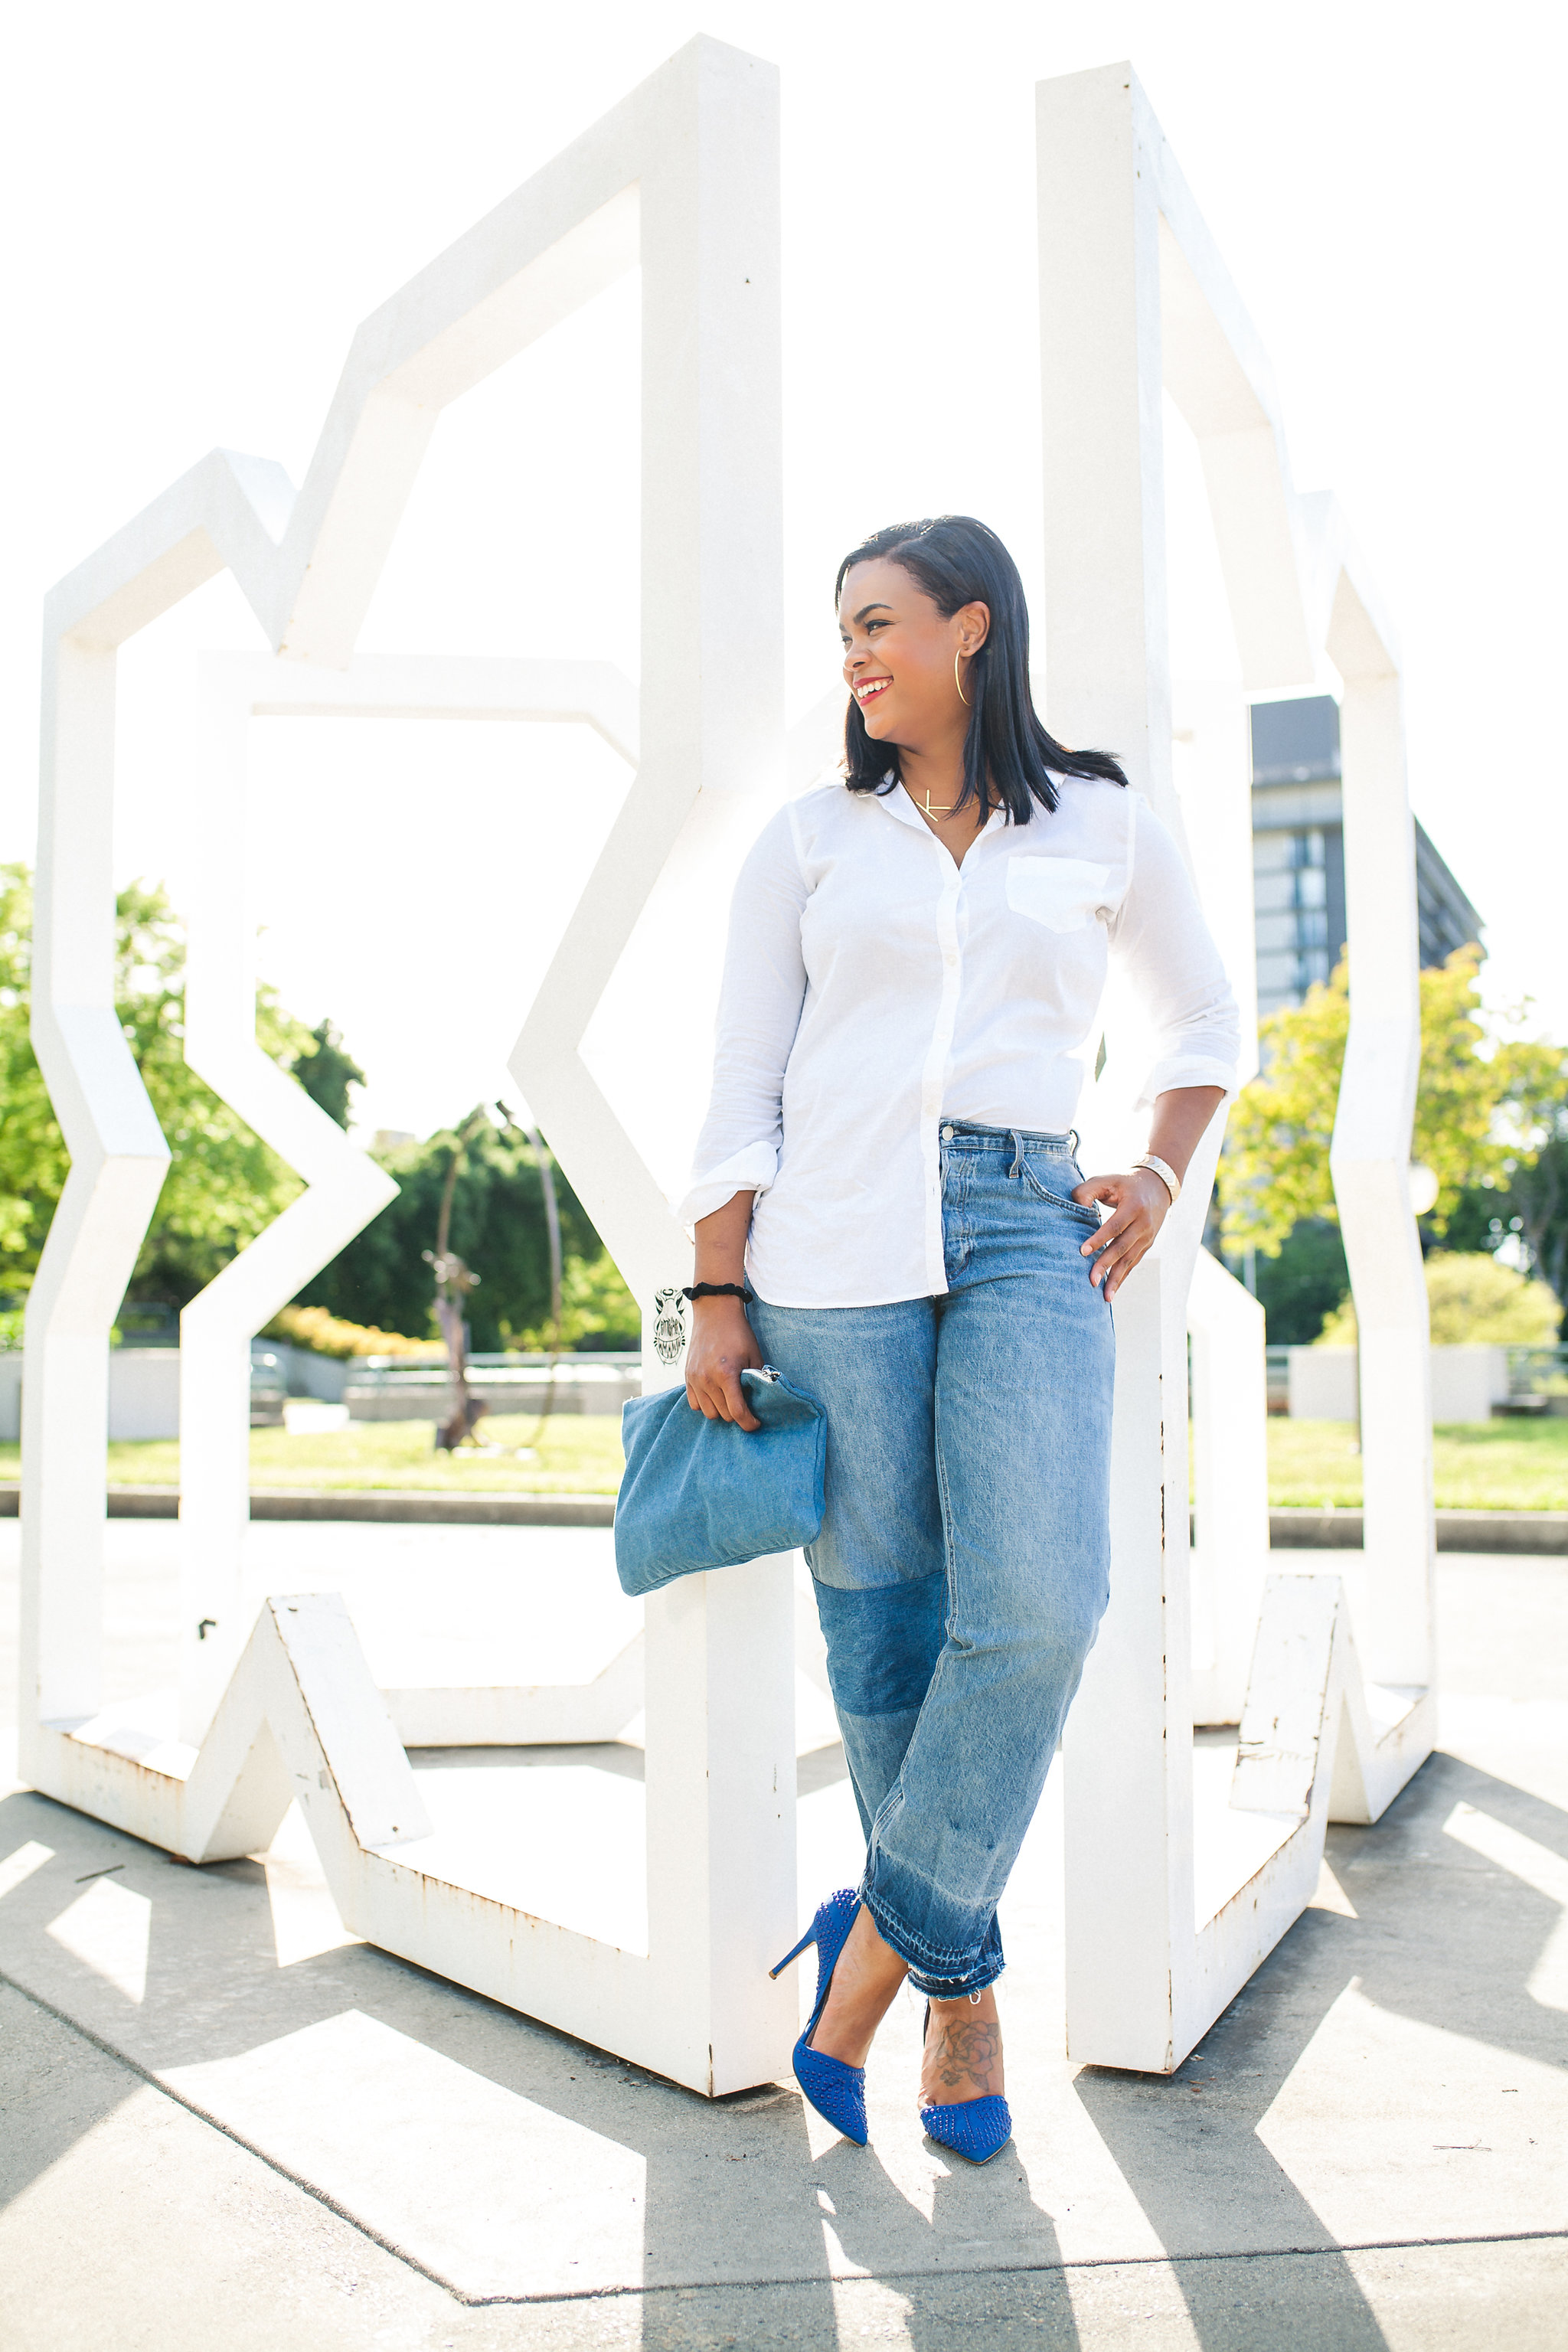 kachet in white tunic shirt with vintage mid rise jeans